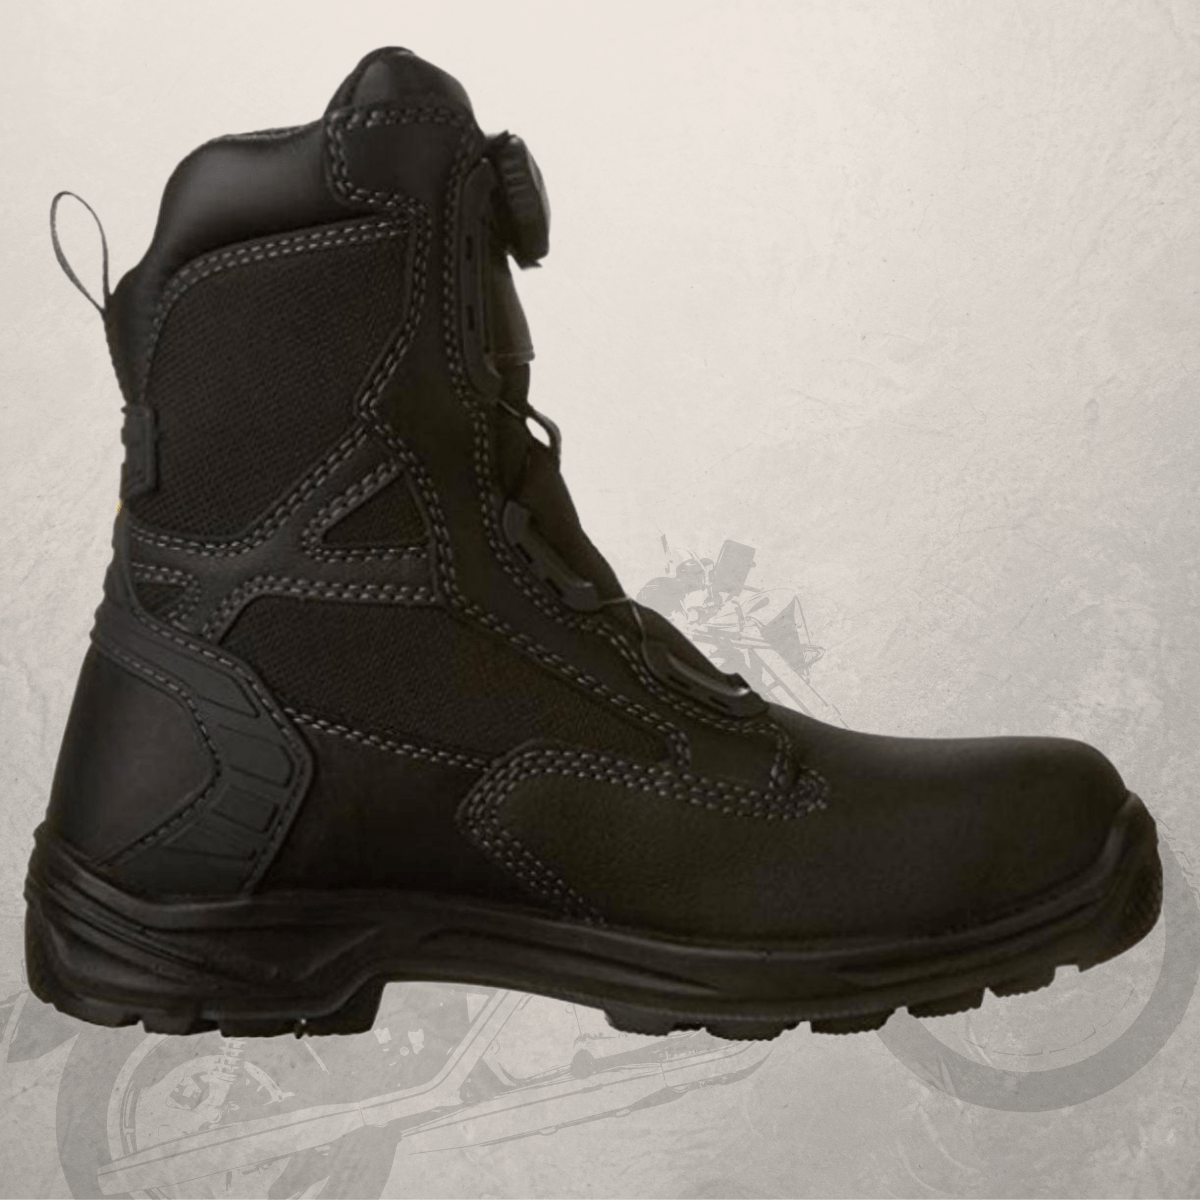 A Boa Work Boots Terra Rexton BOA® Best for Motorcycle & Work with safety features on a grey background.